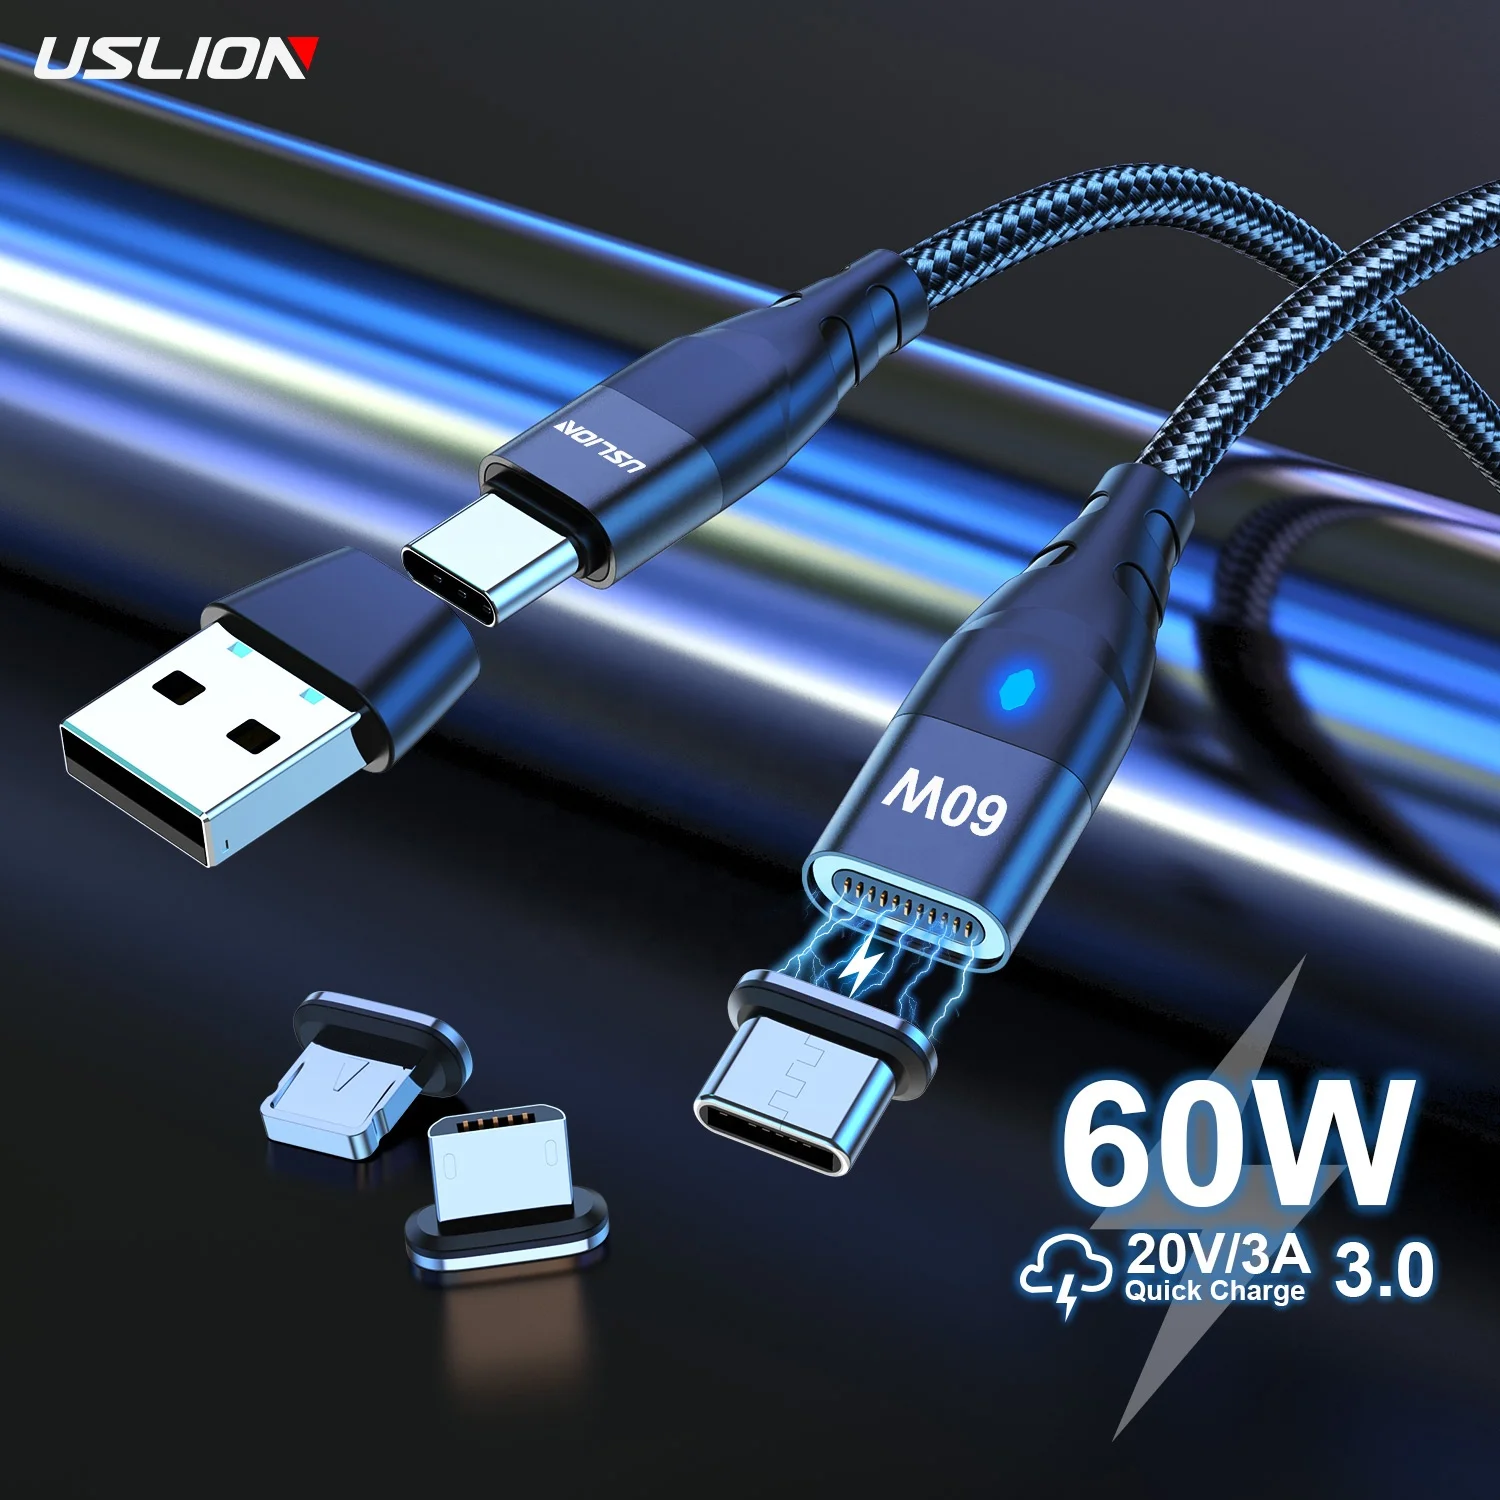 

USLION OEM 1M PD 60W 6 IN 1 USB Type C Magnetic Cable Charger Mobile Phone 3 IN 1 Micro USB Data Cables Phone Tablet for iphone, Black blue purple red (oem color contact seller)